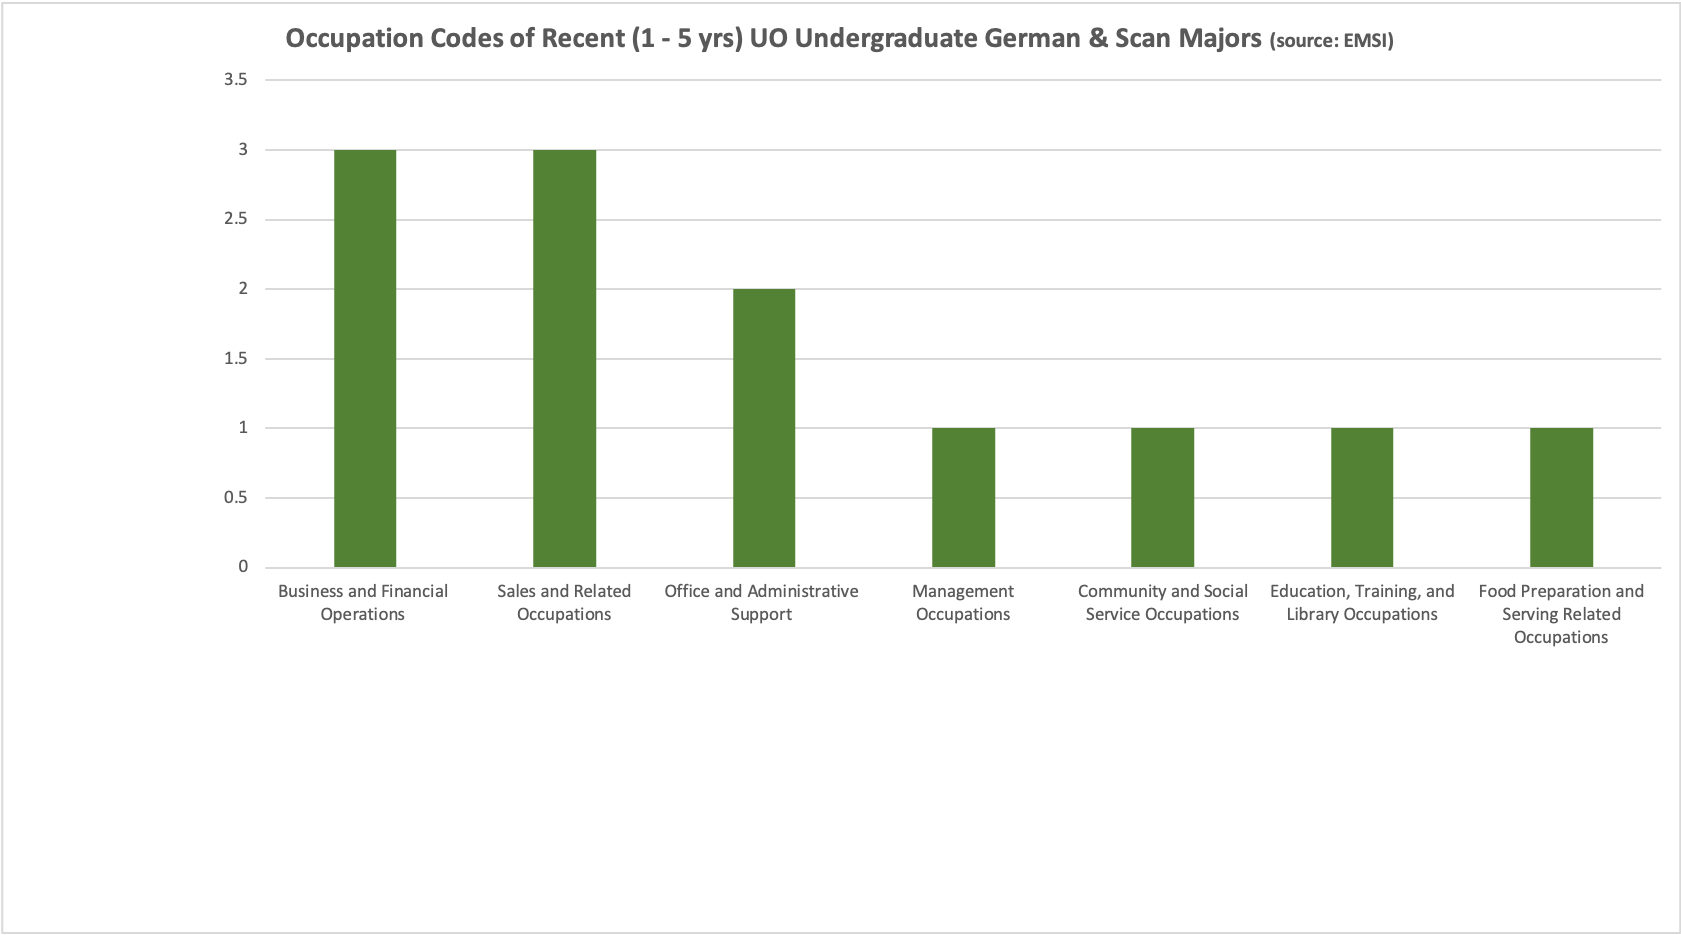 Graph showing occupations of graduates in the past 1-5 years